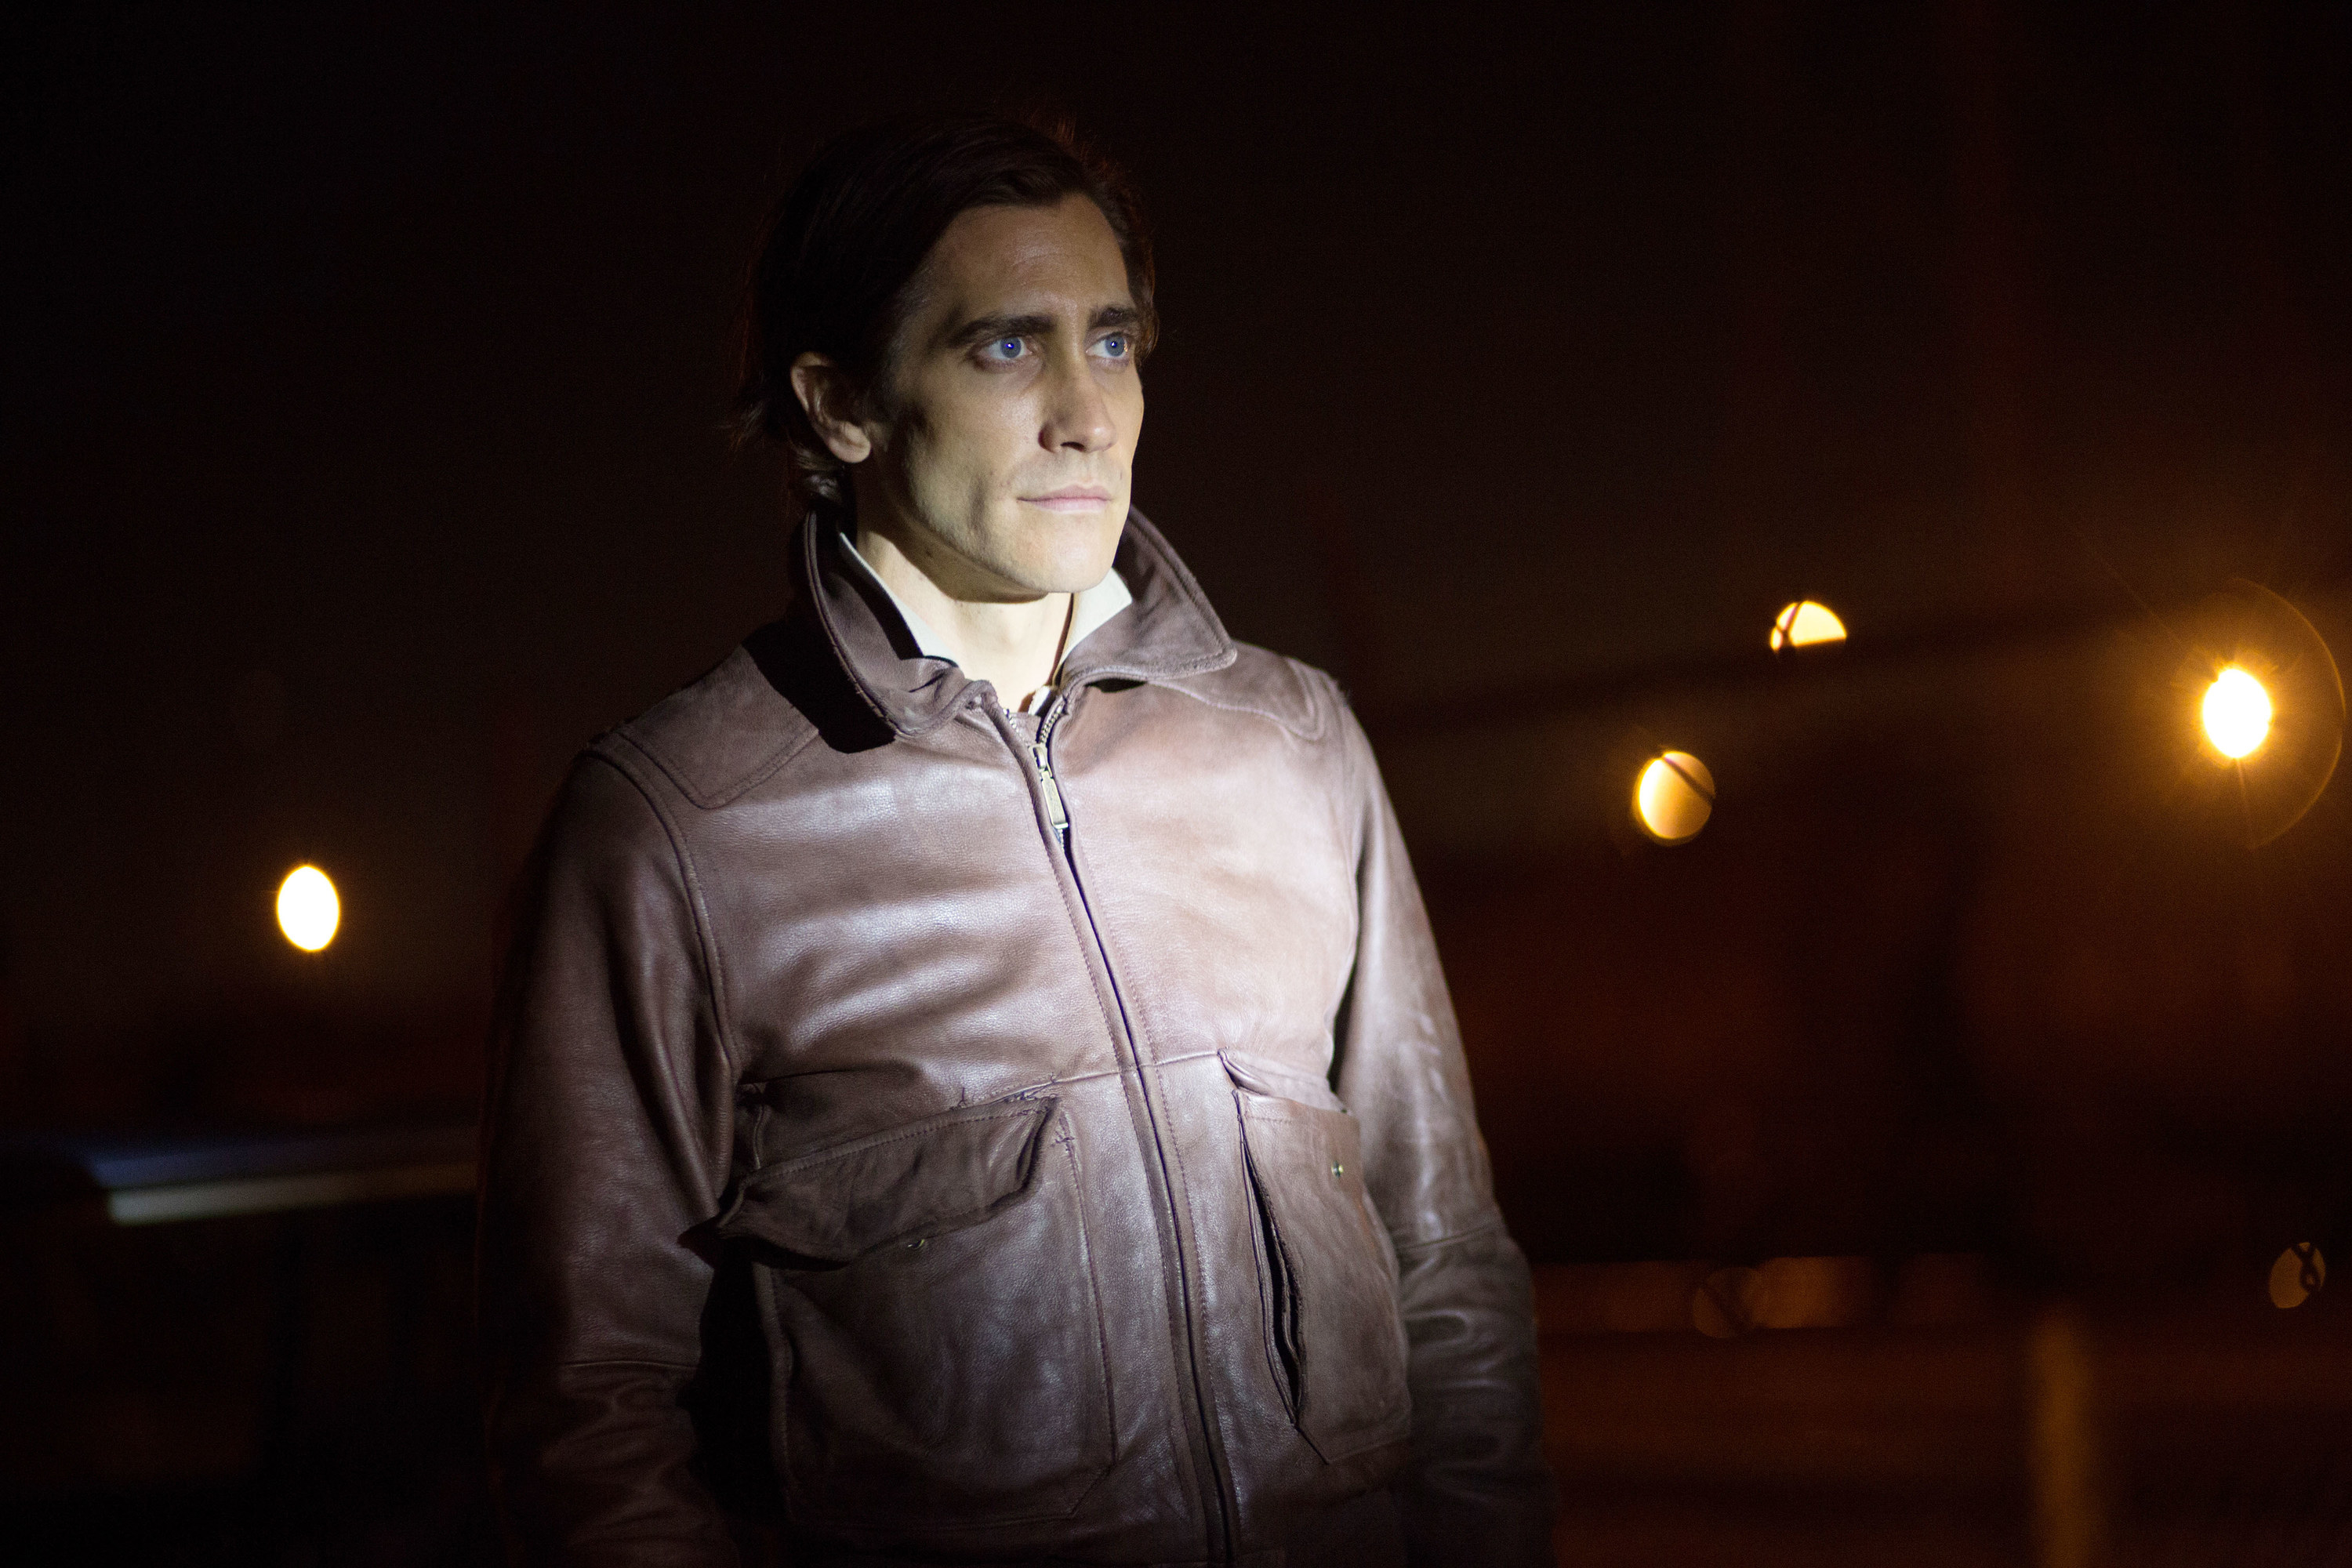 Gyllenhaal as Lou outside with a light shining on his body